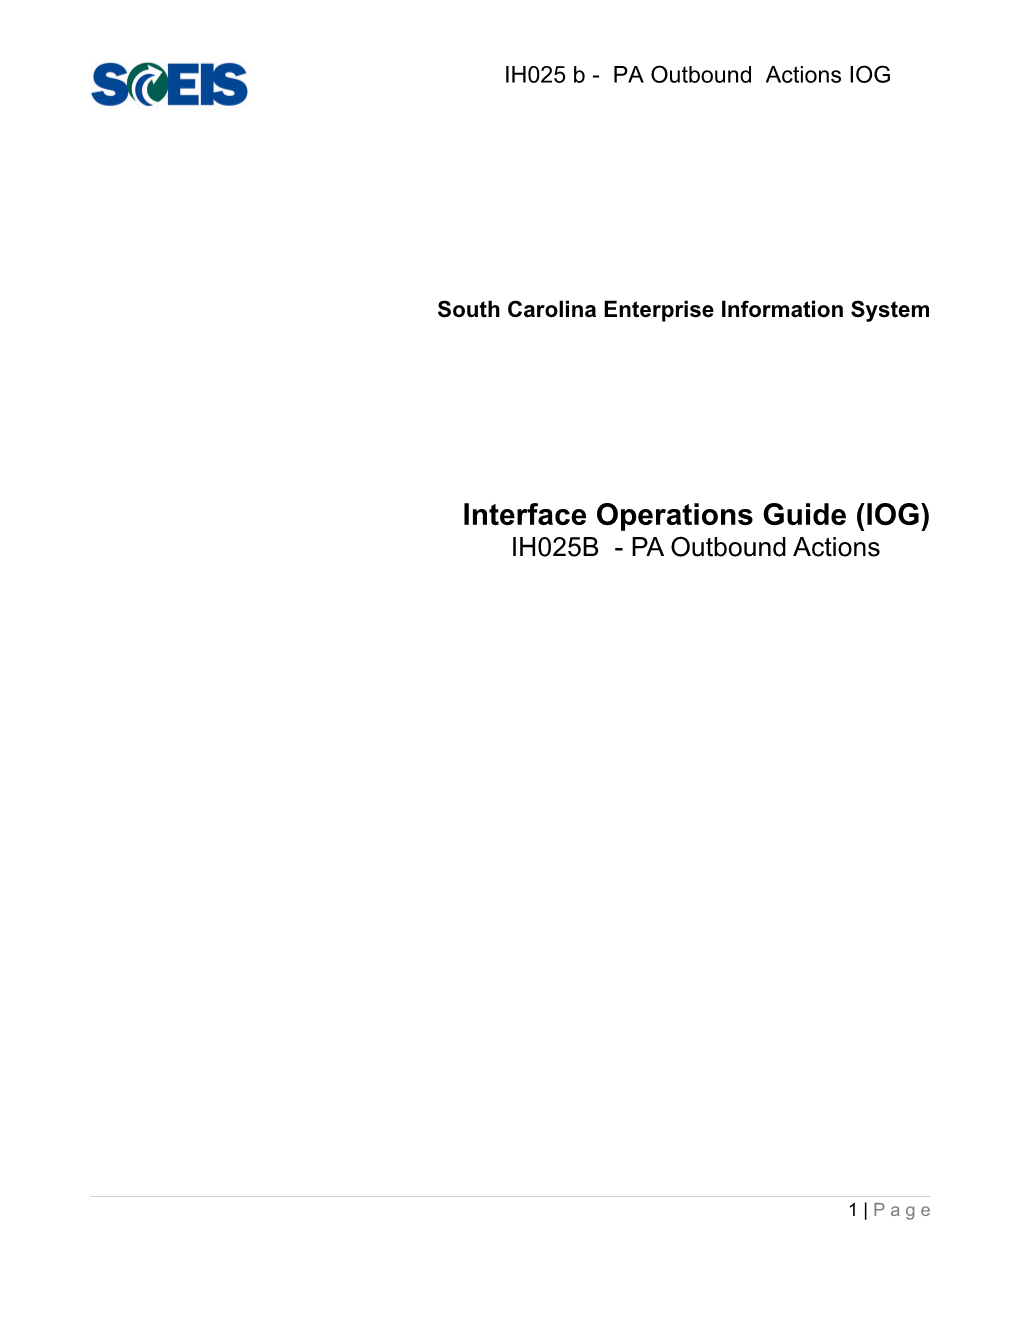 IH025B IOG - Personnel Actions Outbound Interface